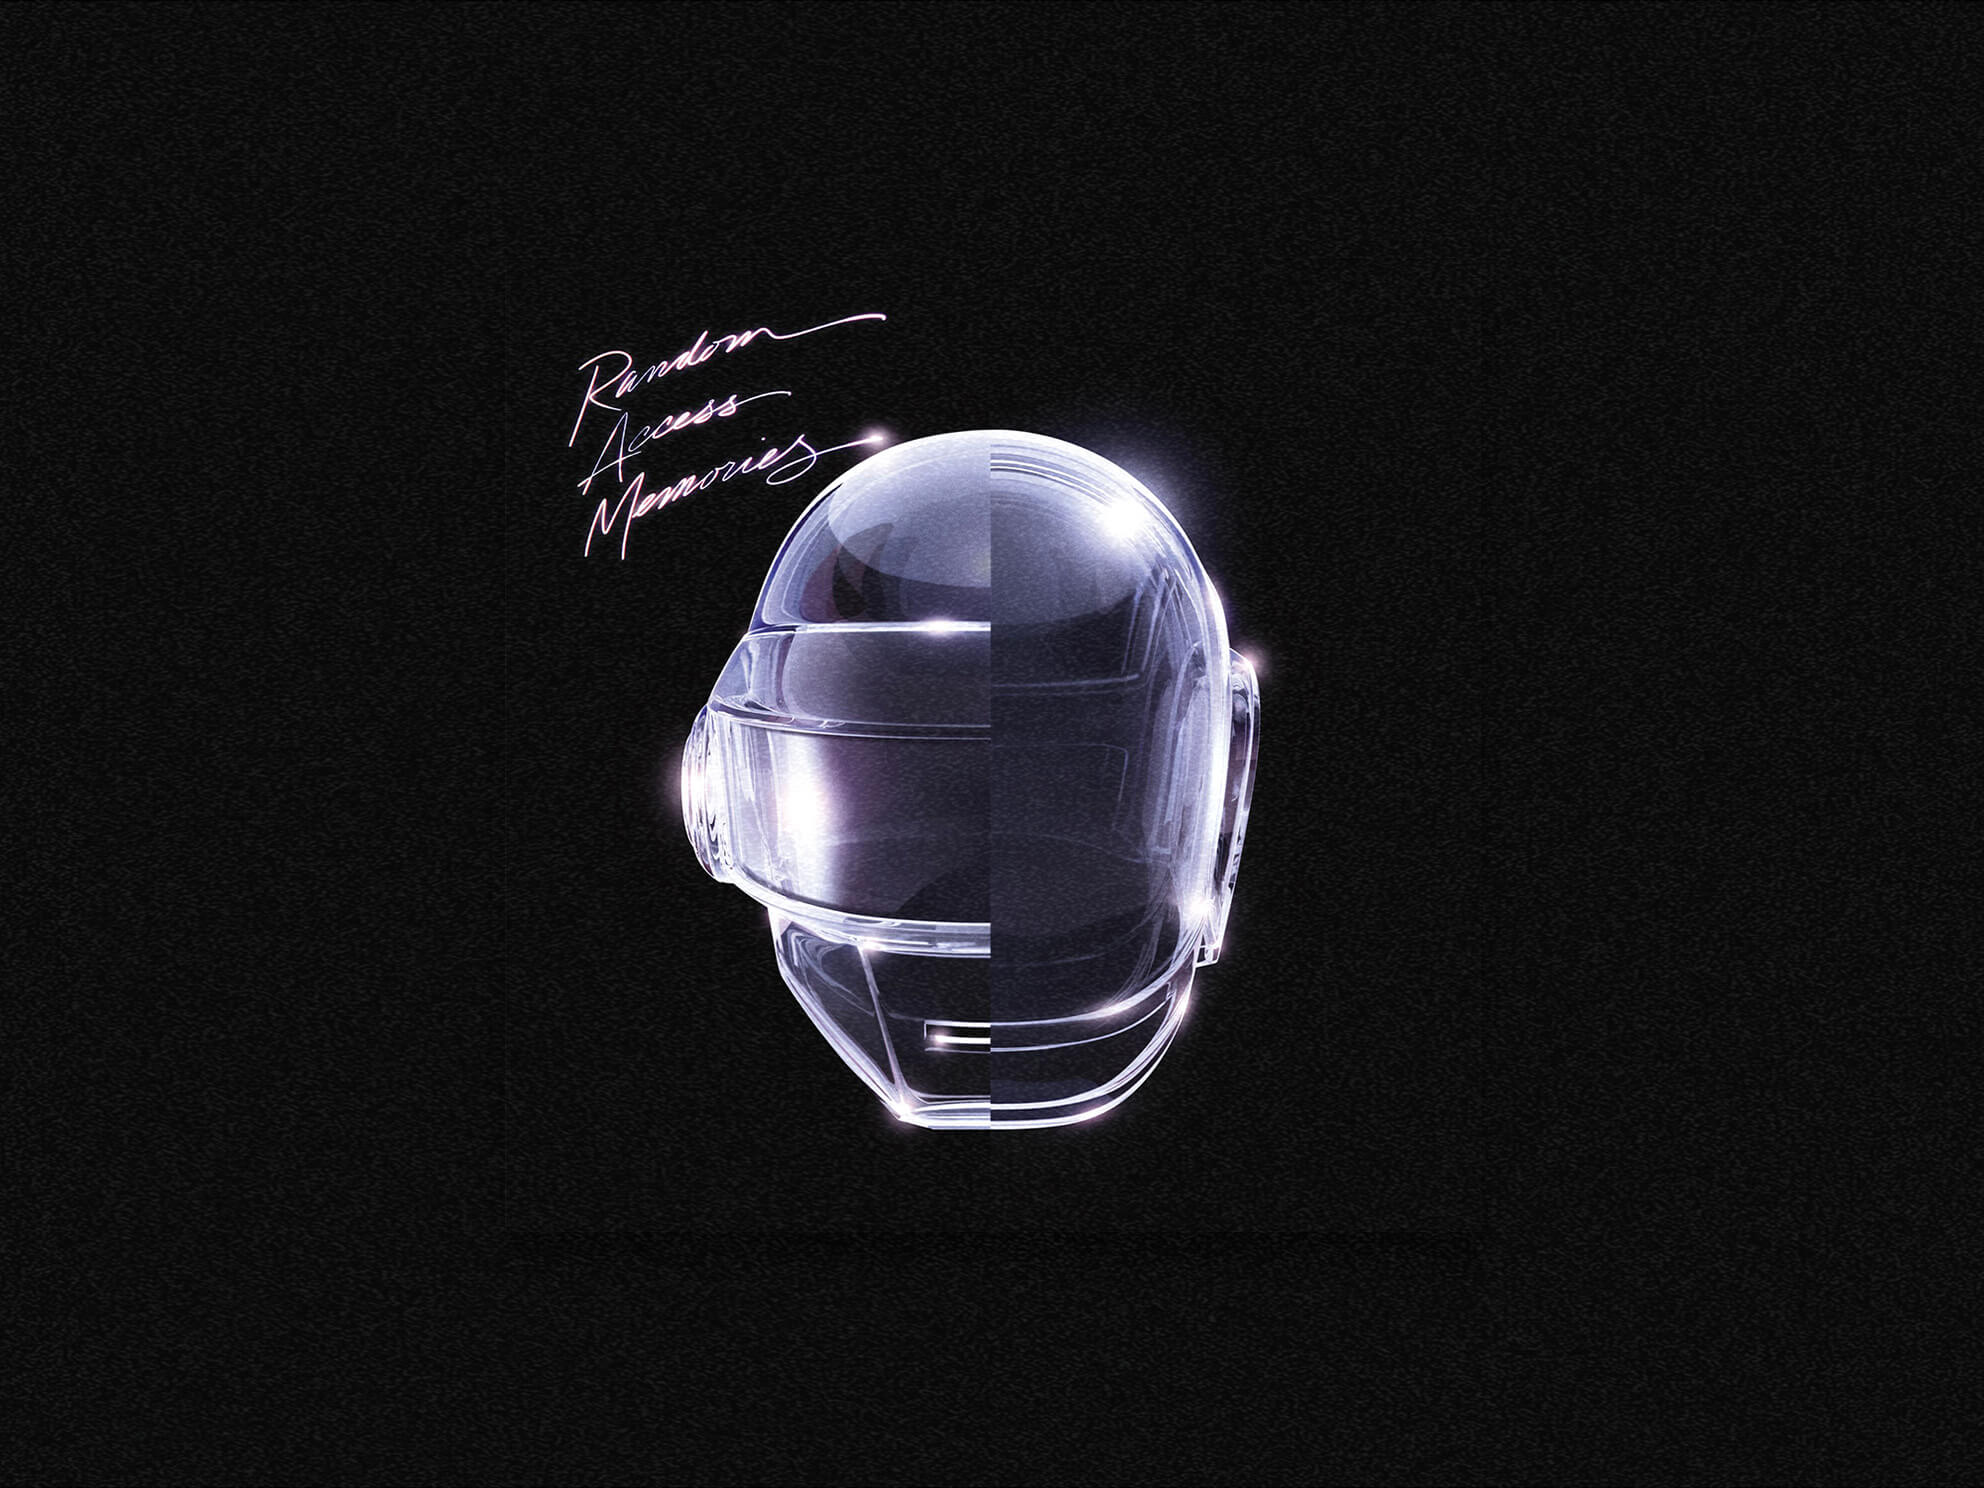 Daft Punk to release new, unfinished music and early demos in May